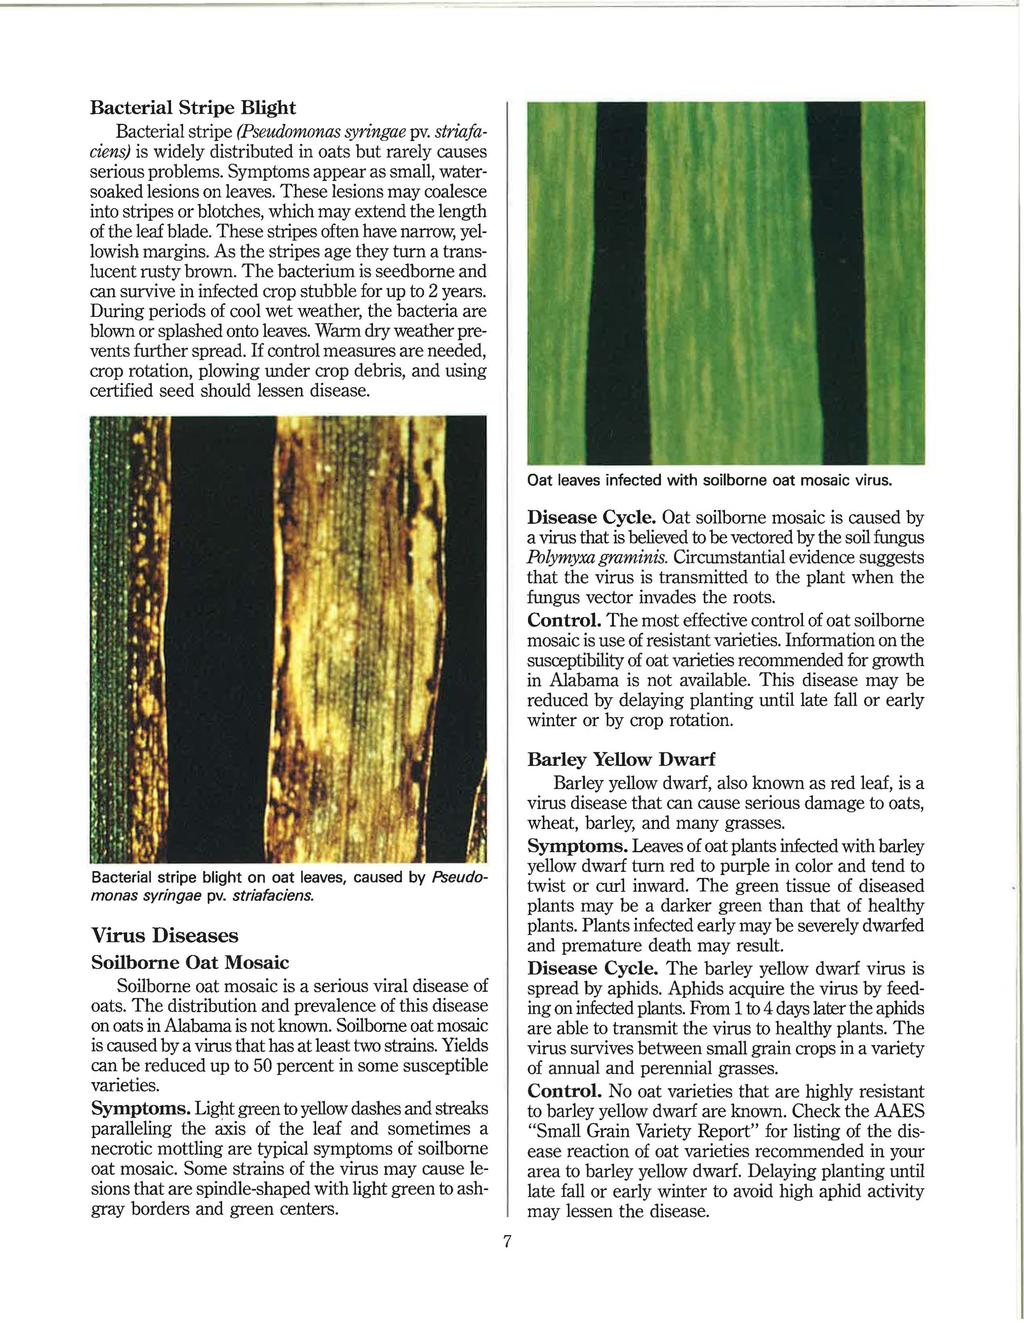 Bacterial Stripe Blight Bacterial stripe (Pseudomonas syringae pv. striajaciens) is widely distributed in oats but rarely causes serious problems.